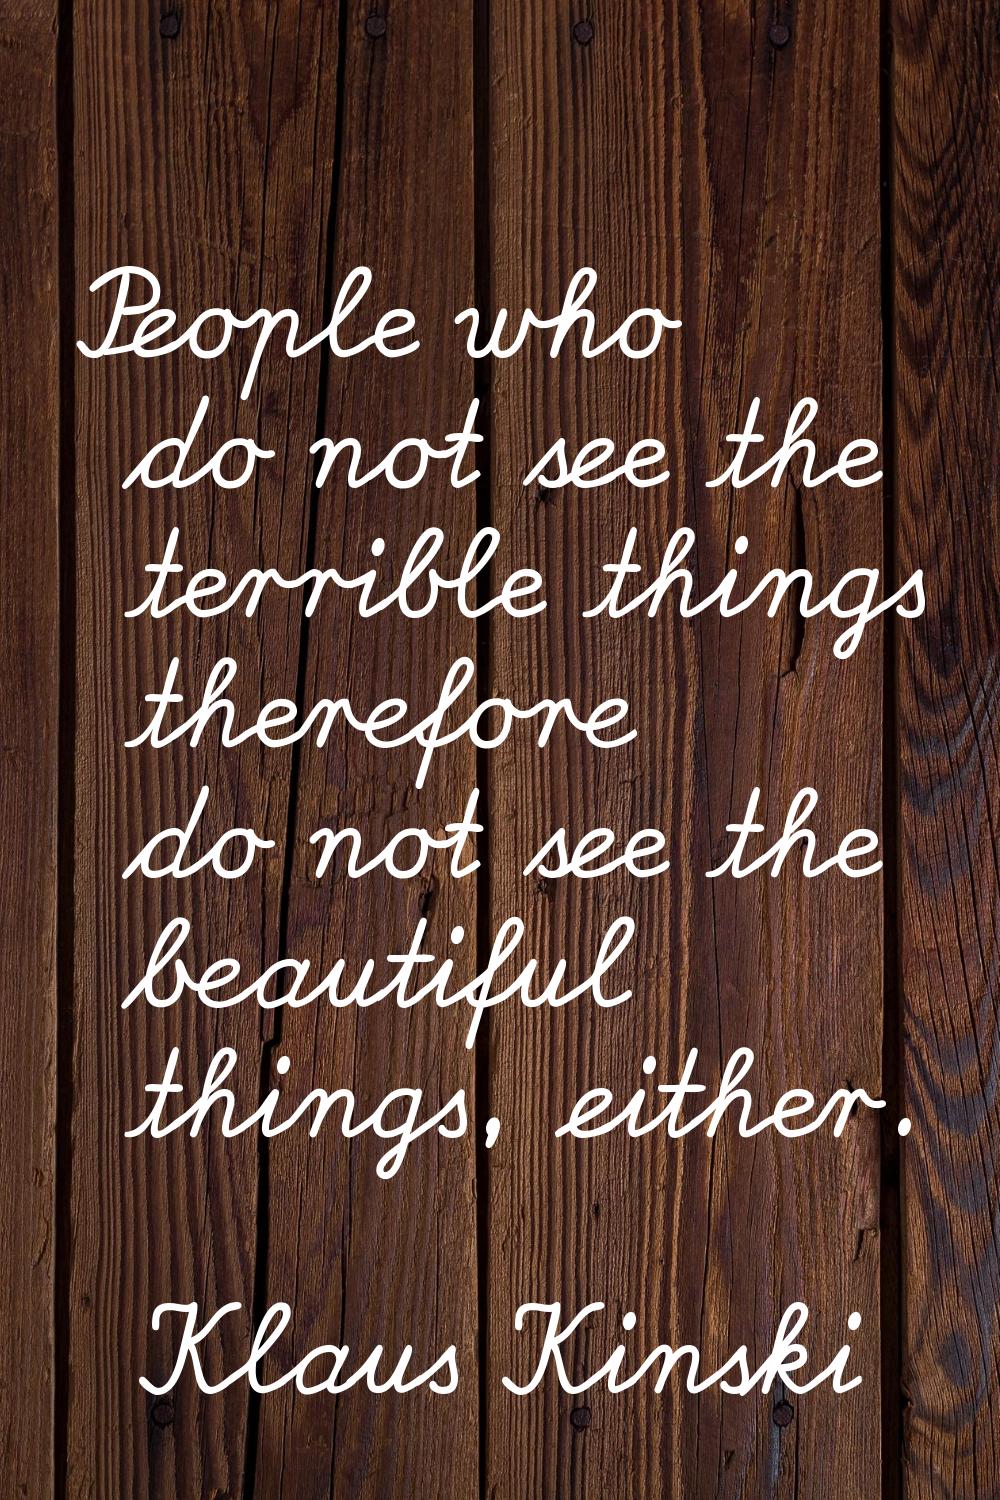 People who do not see the terrible things therefore do not see the beautiful things, either.